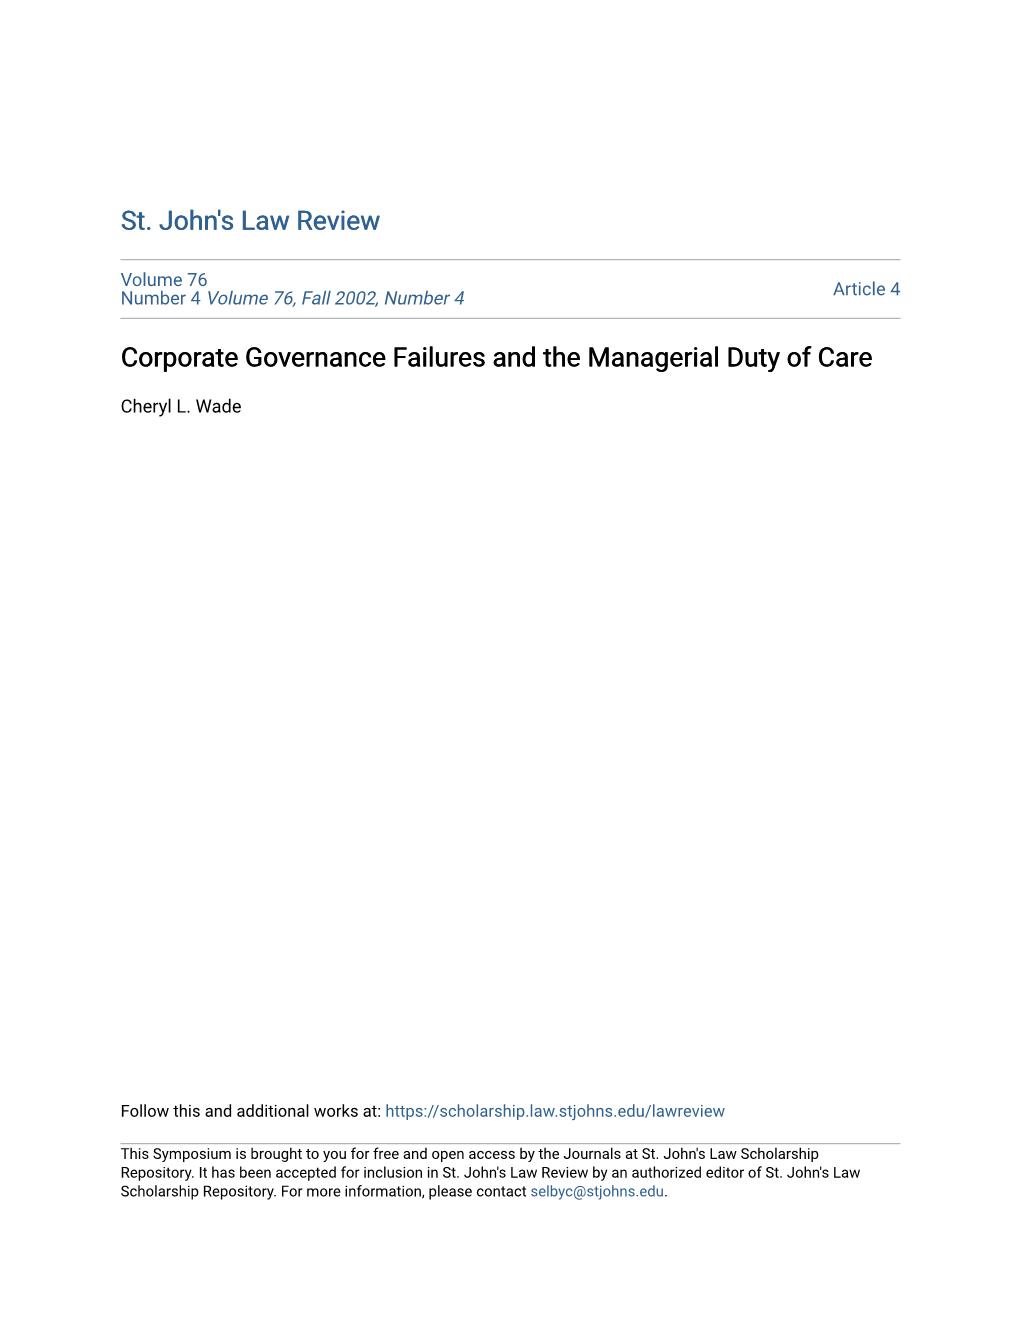 Corporate Governance Failures and the Managerial Duty of Care